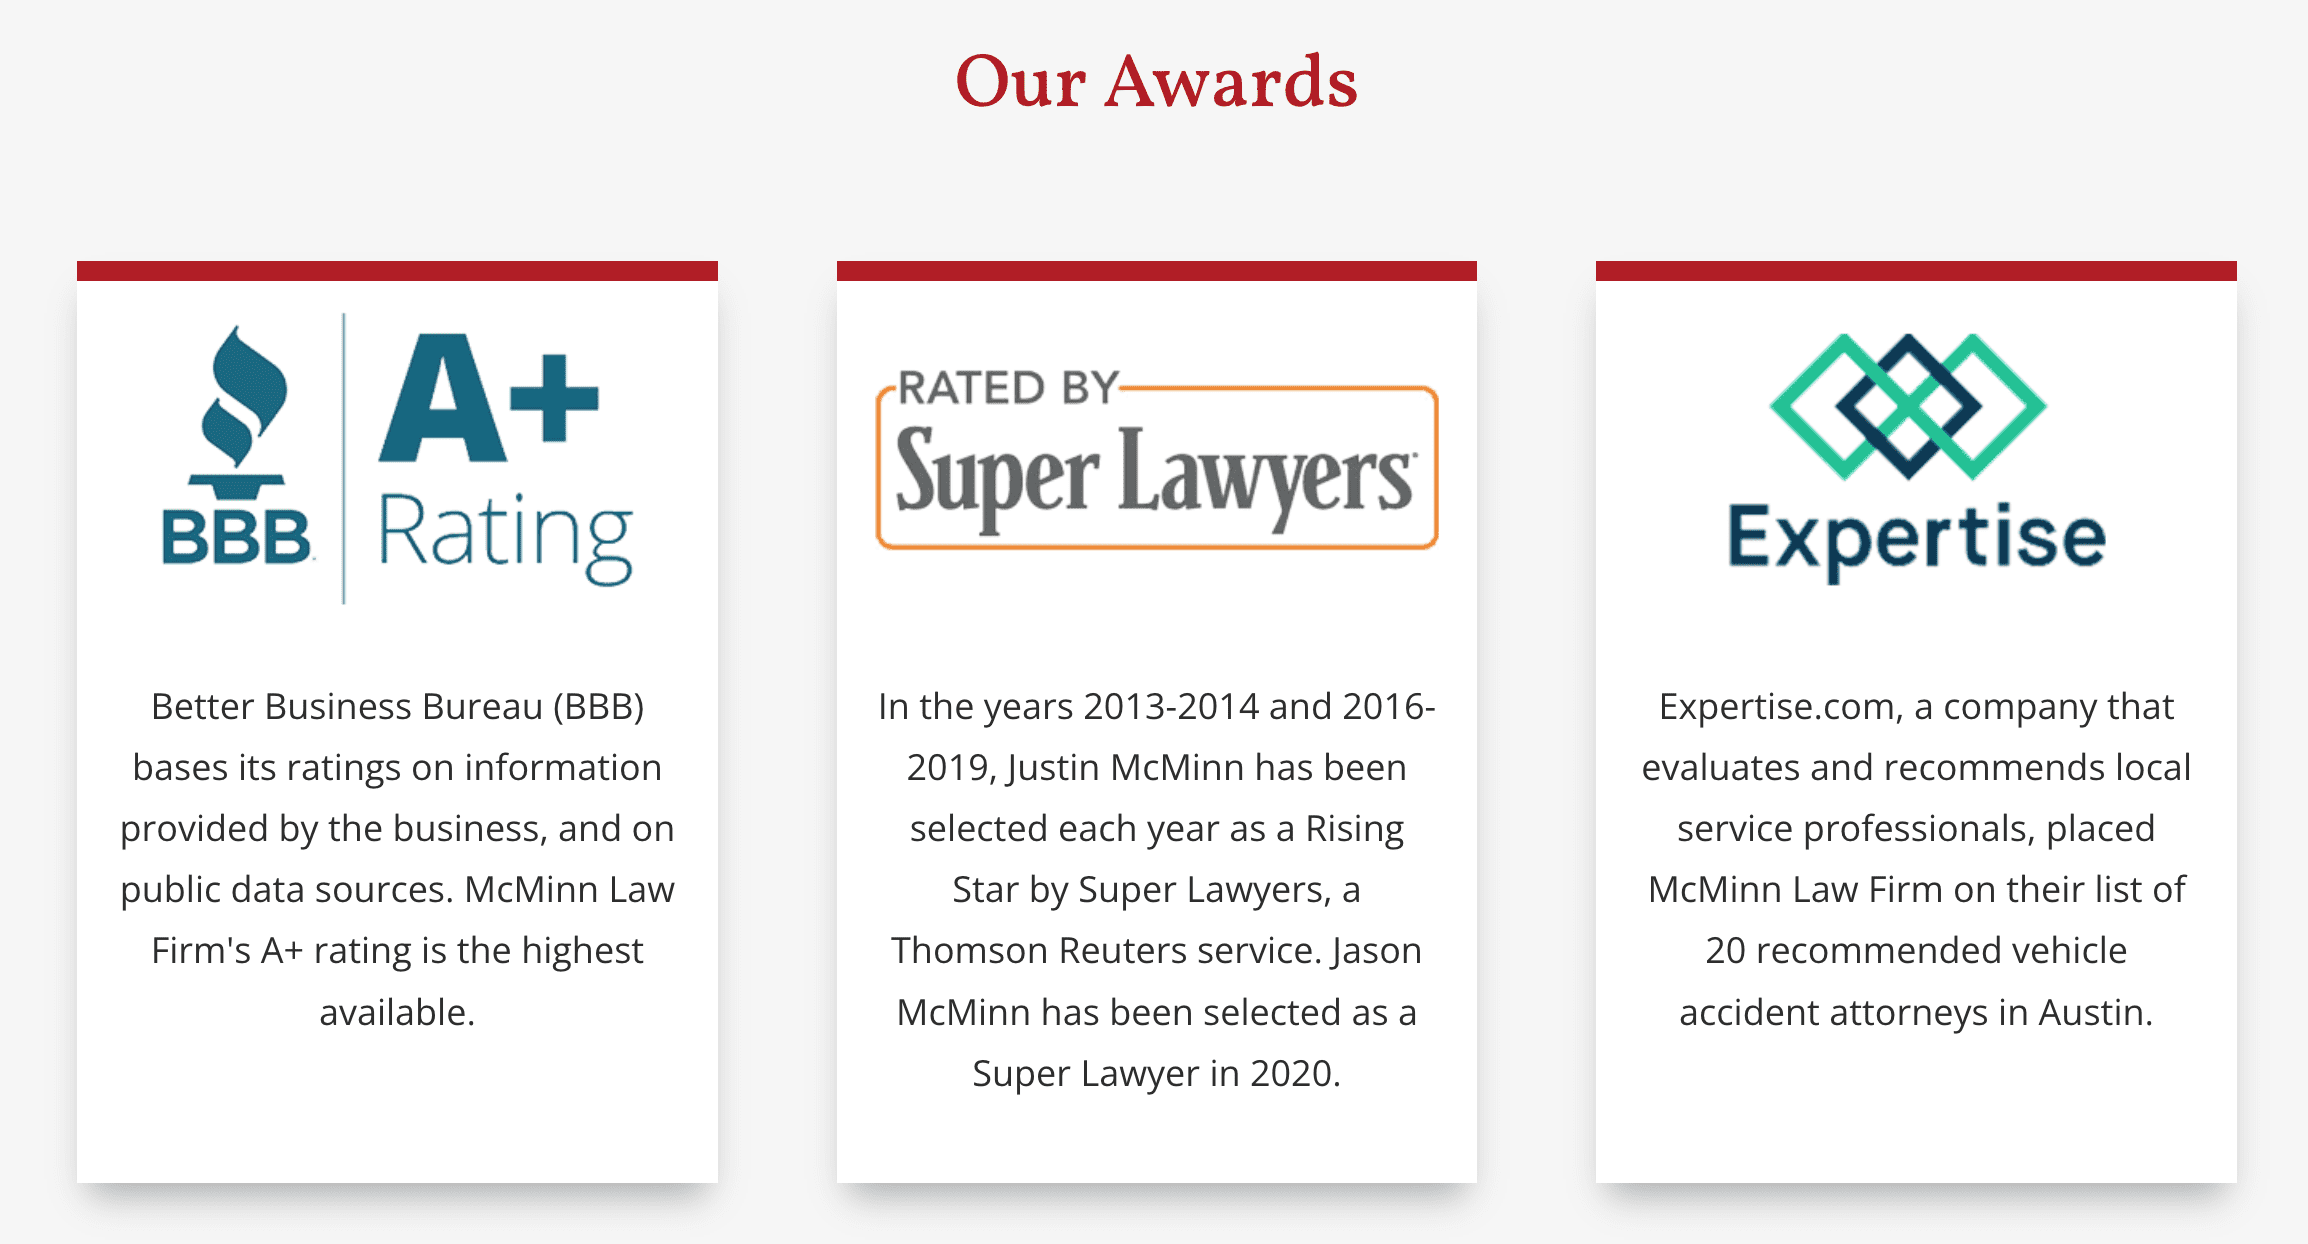 McMinn Law firm awards: A+ Better Business Bureau rating, Super Lawyers badge, and Expertise.com 20 recommended vehicle accident attorneys in Austin.